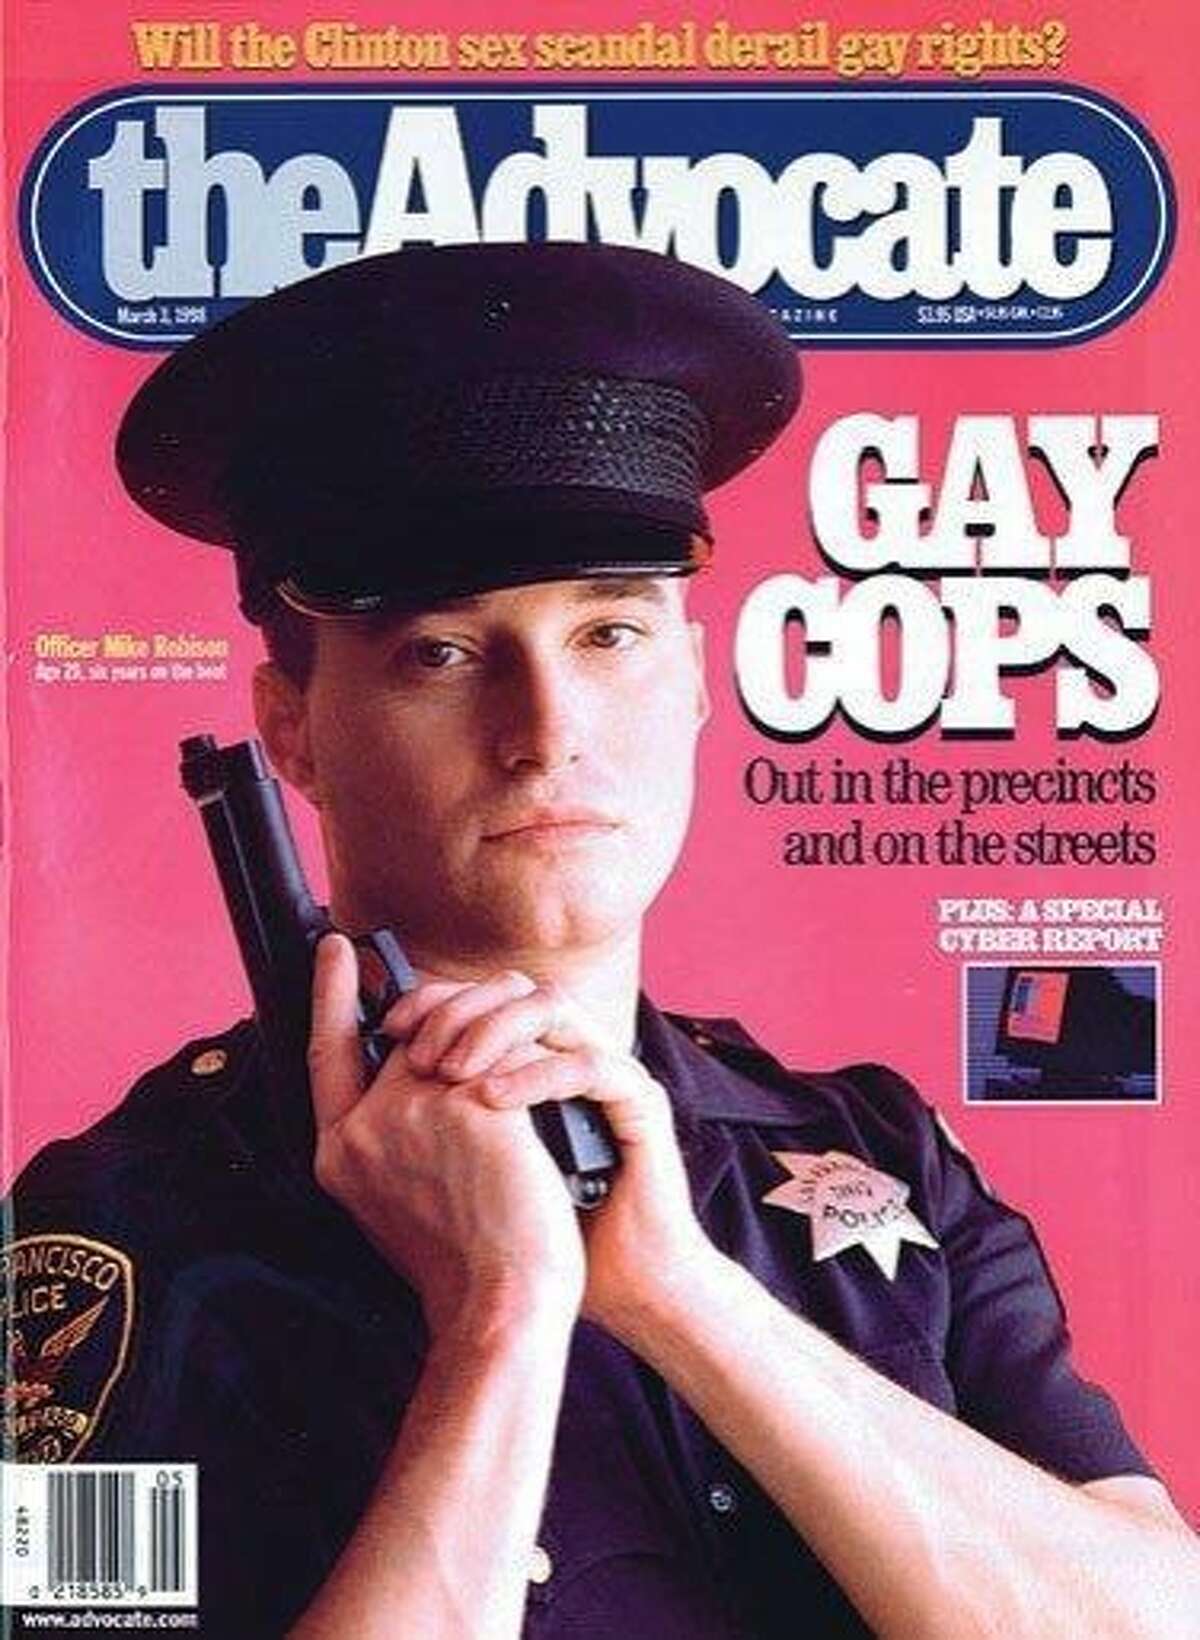 Michael Robison, one of the San Francisco police officers identified in a department probe of racist and homophobic text messages, was featured on the cover of the Advocate, a magazine that caters to gay readers, in March 1998, six years after joining the department as an openly gay man.